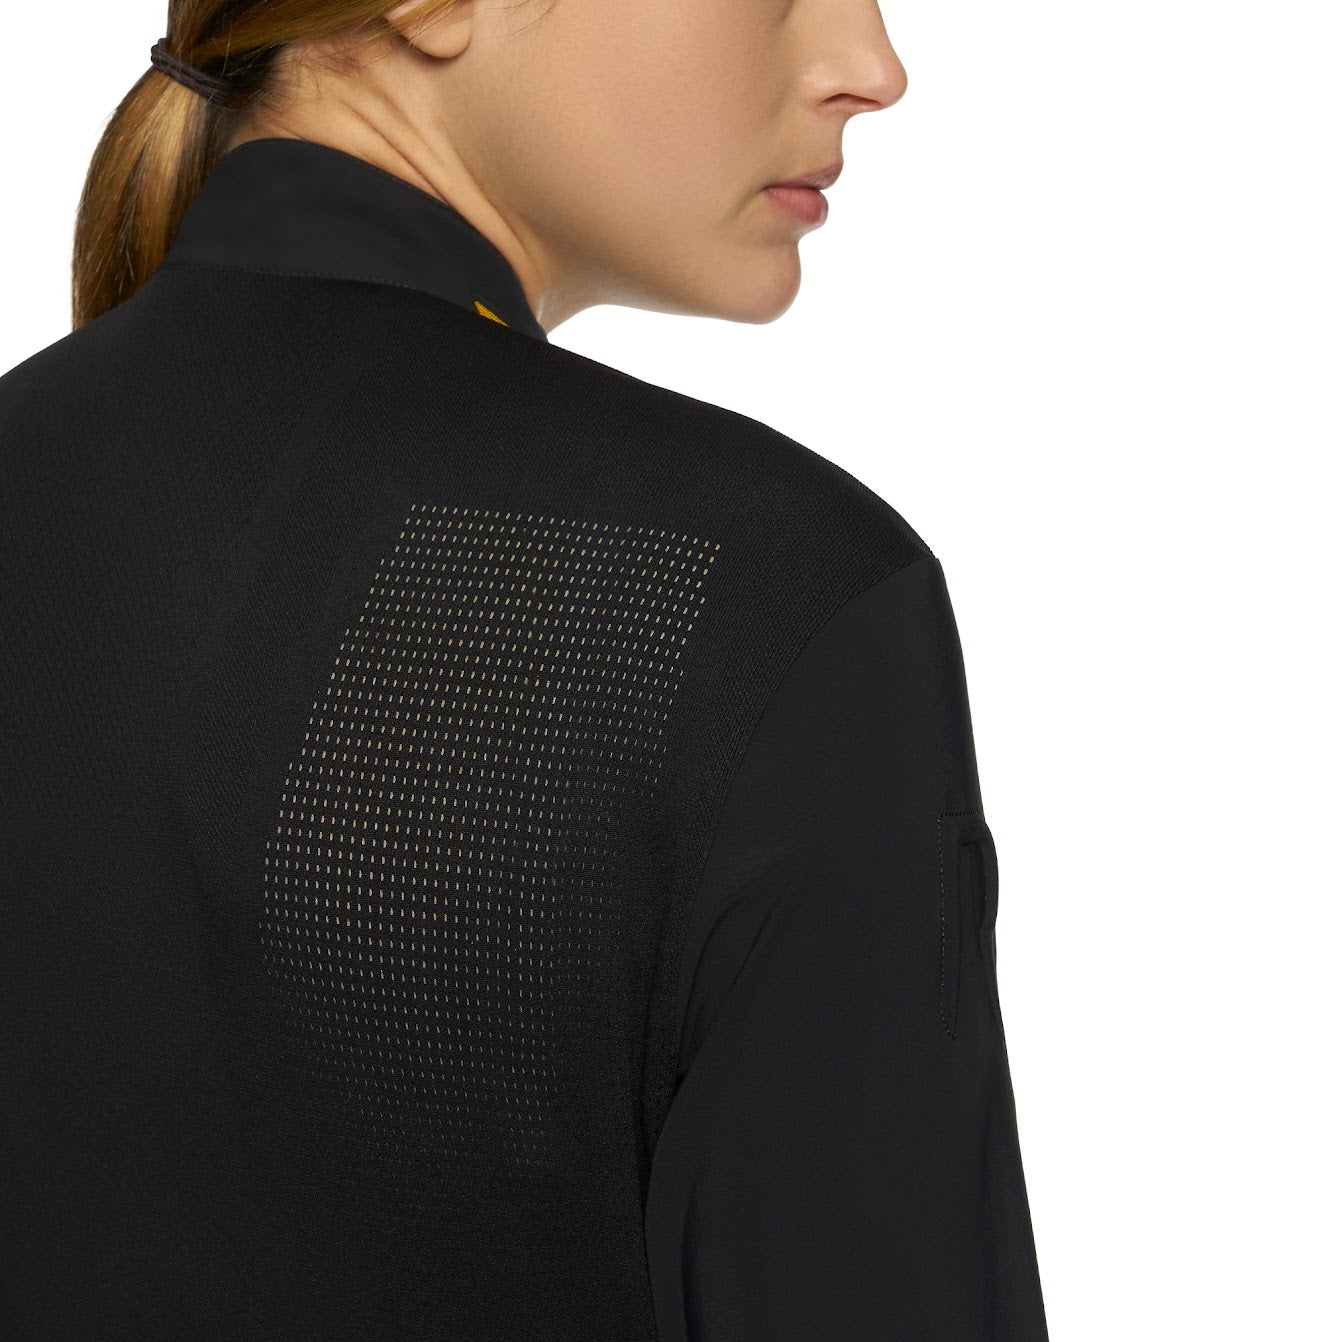 Look smart with the Cavalleria Toscana Revo Epaulet training top. this seasons new Revolution range is stunning. The yellow trims with the black sets this range apart from the crowd.  the shirt features a breathable soft jersey front with mesh under arms fully down the sleeve. a fine Revo mesh back and a CT Revo Epaulet Logo on the shoulder. Zip front opening.   Pod276